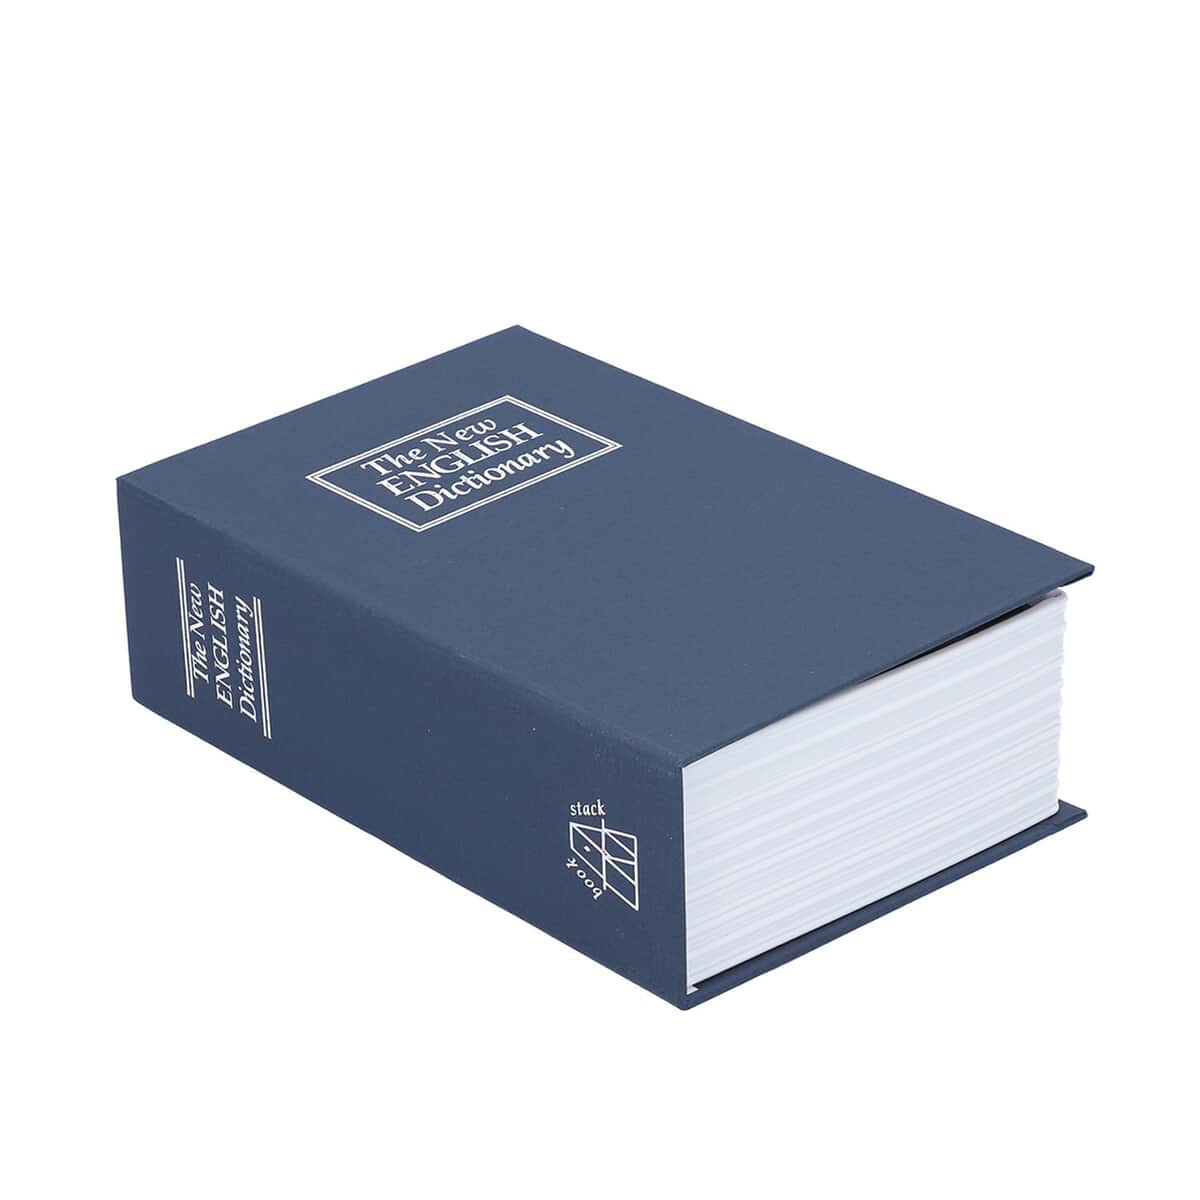 Small Dictionary Diversion Secret Hidden Book Safe with Key Lock - Blue image number 3